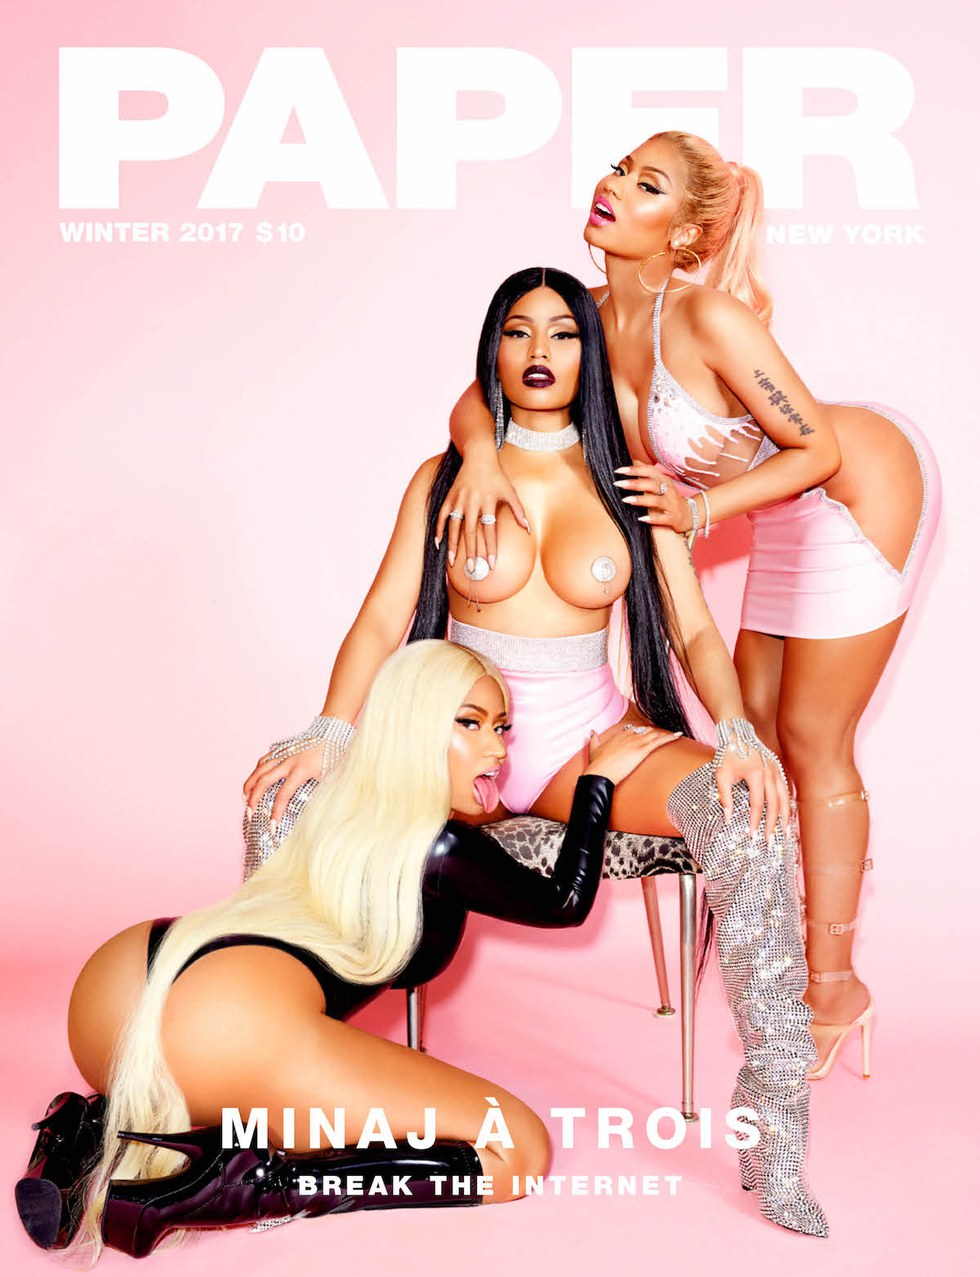 Nicki Minaj has a threesome with herself as she attempts to 'Break The Internet' on Paper